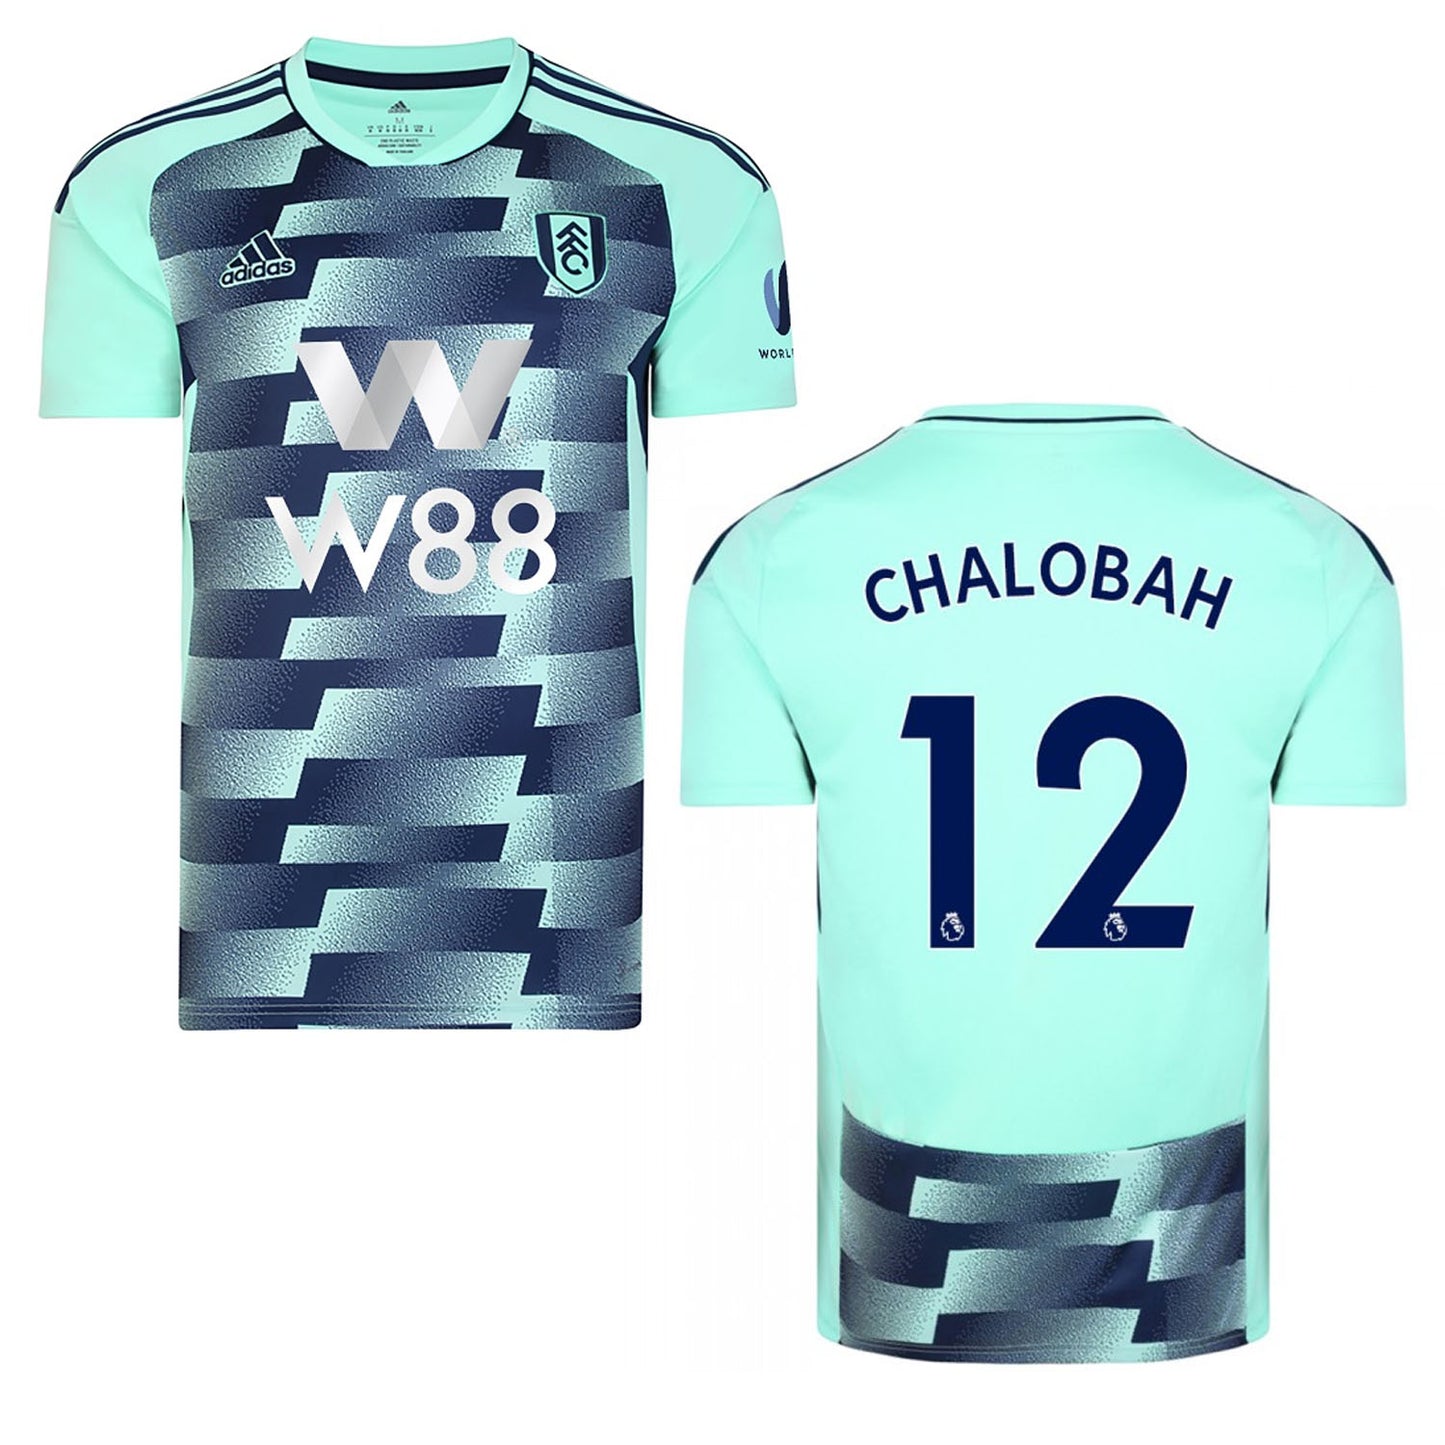 Nathaniel Chalobah Fulham 12 Jersey